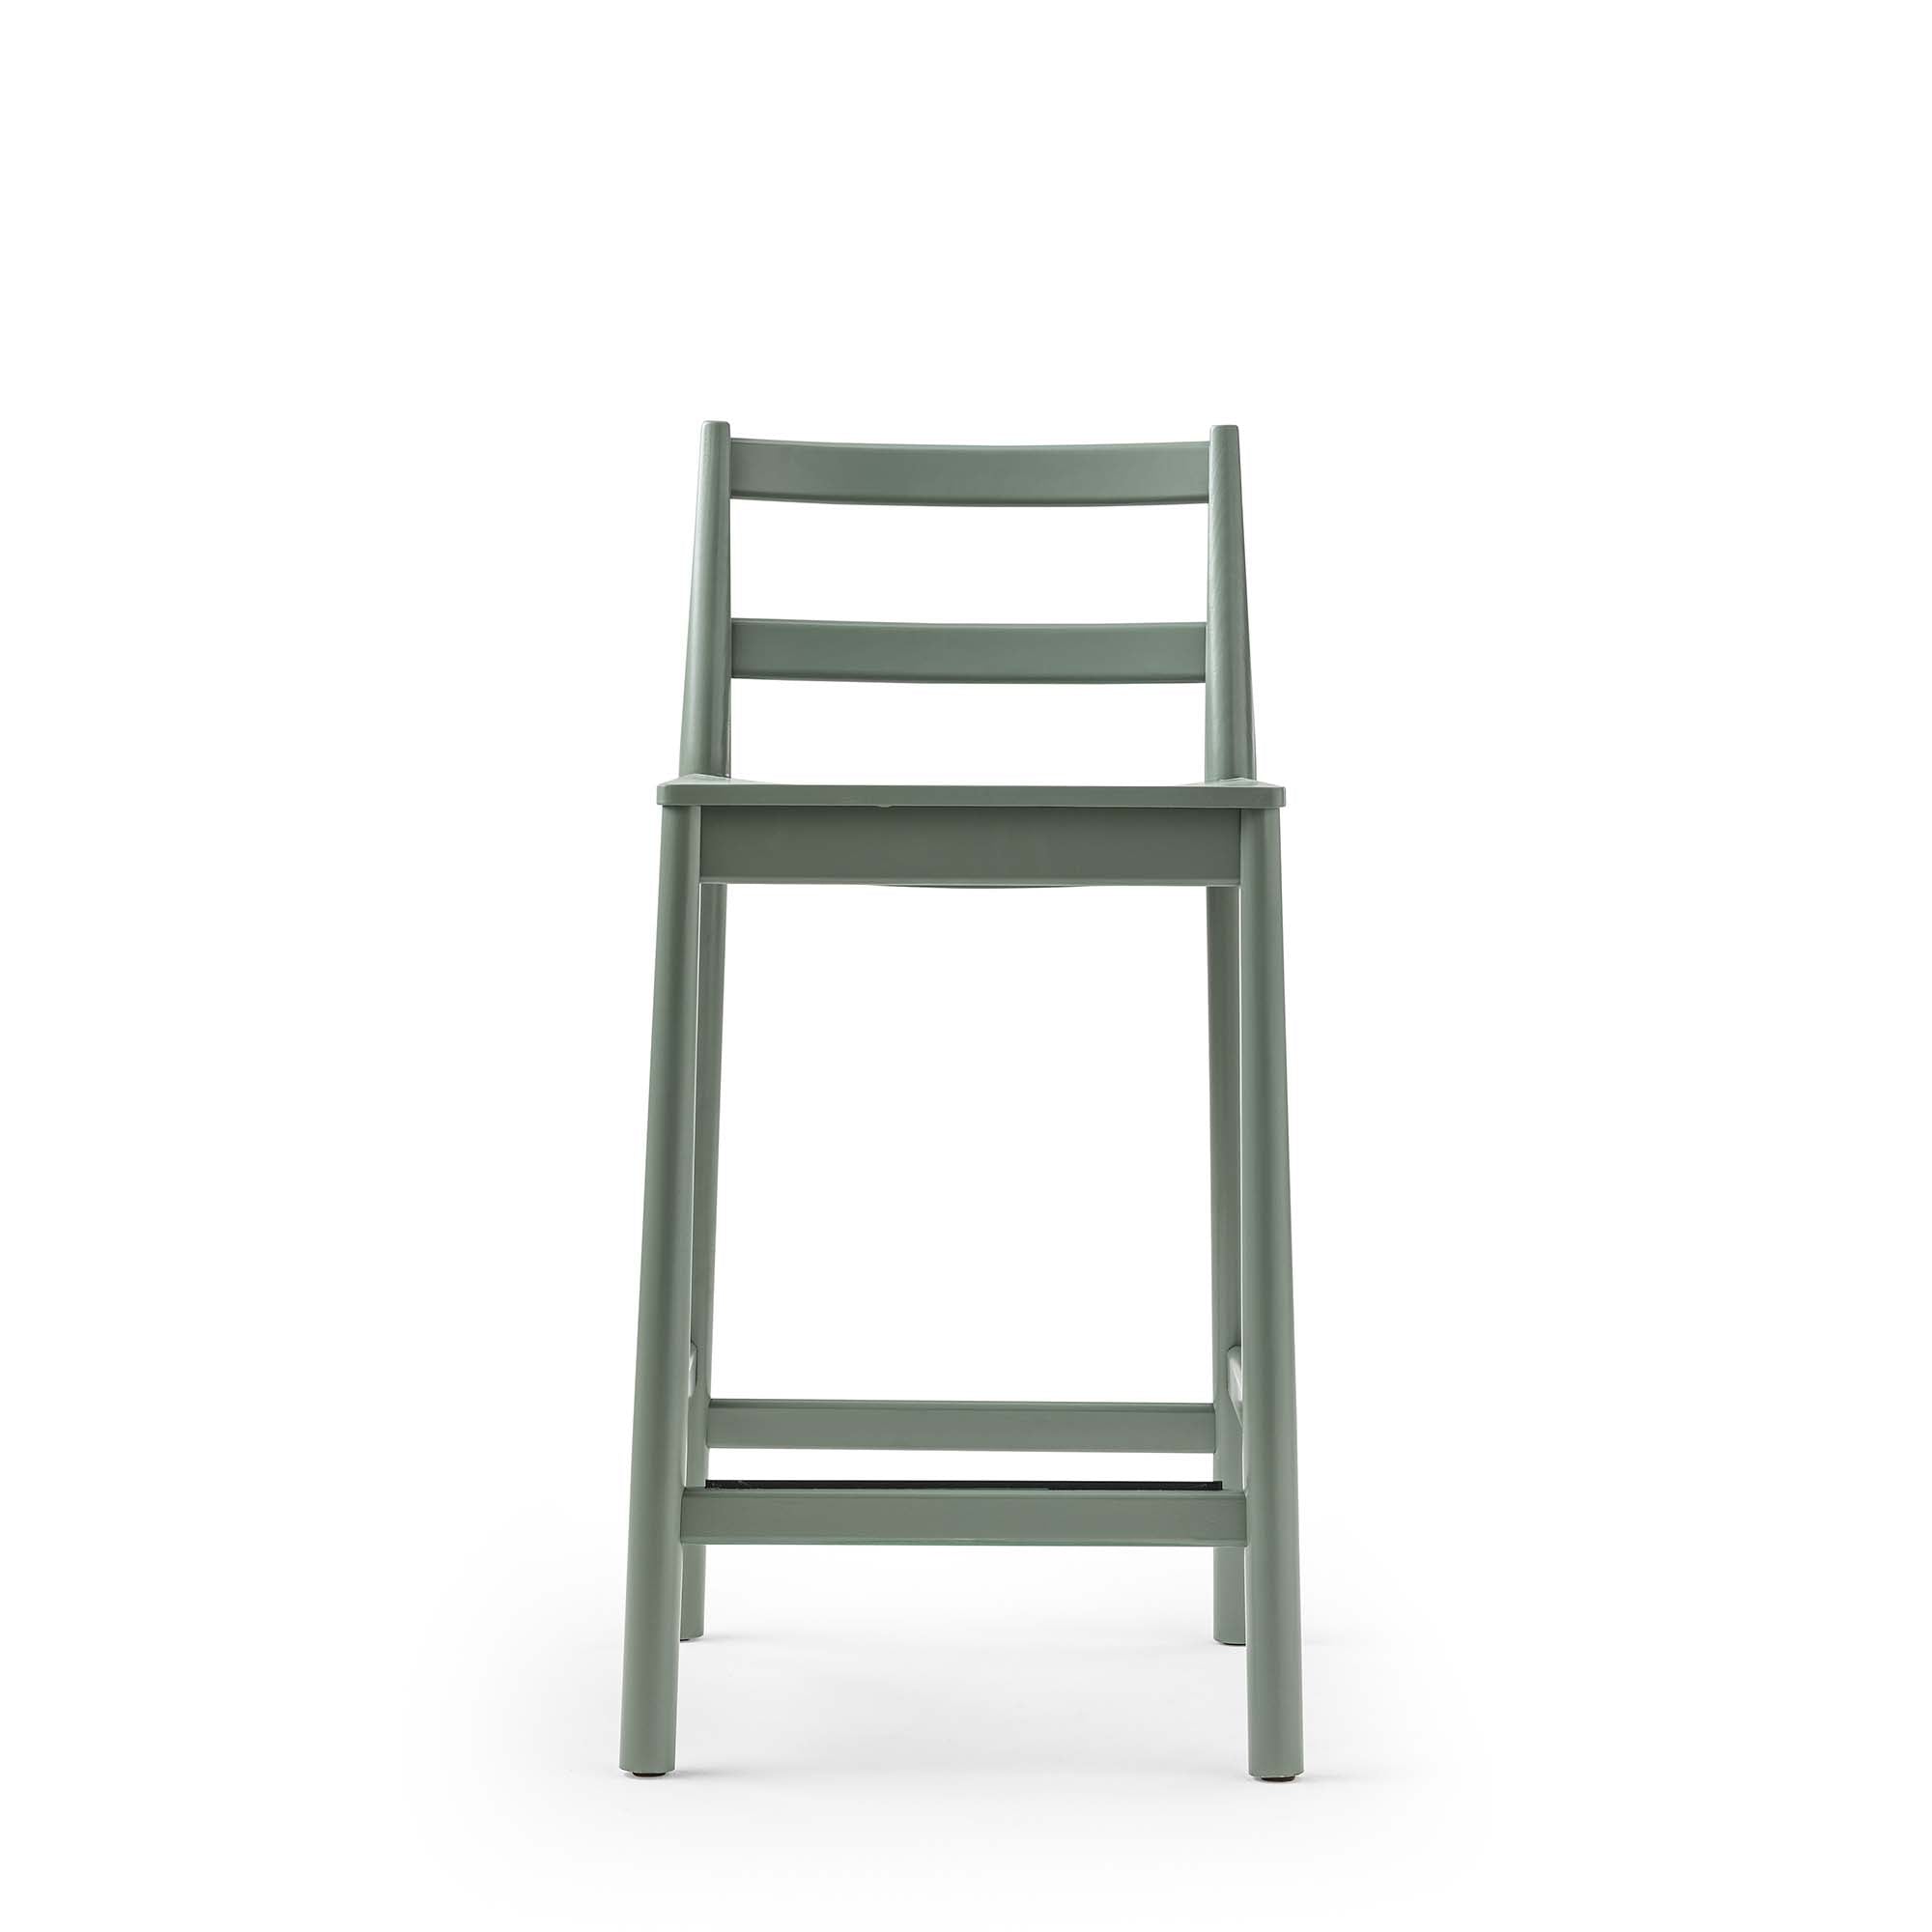 JULIE LE Stool green front view